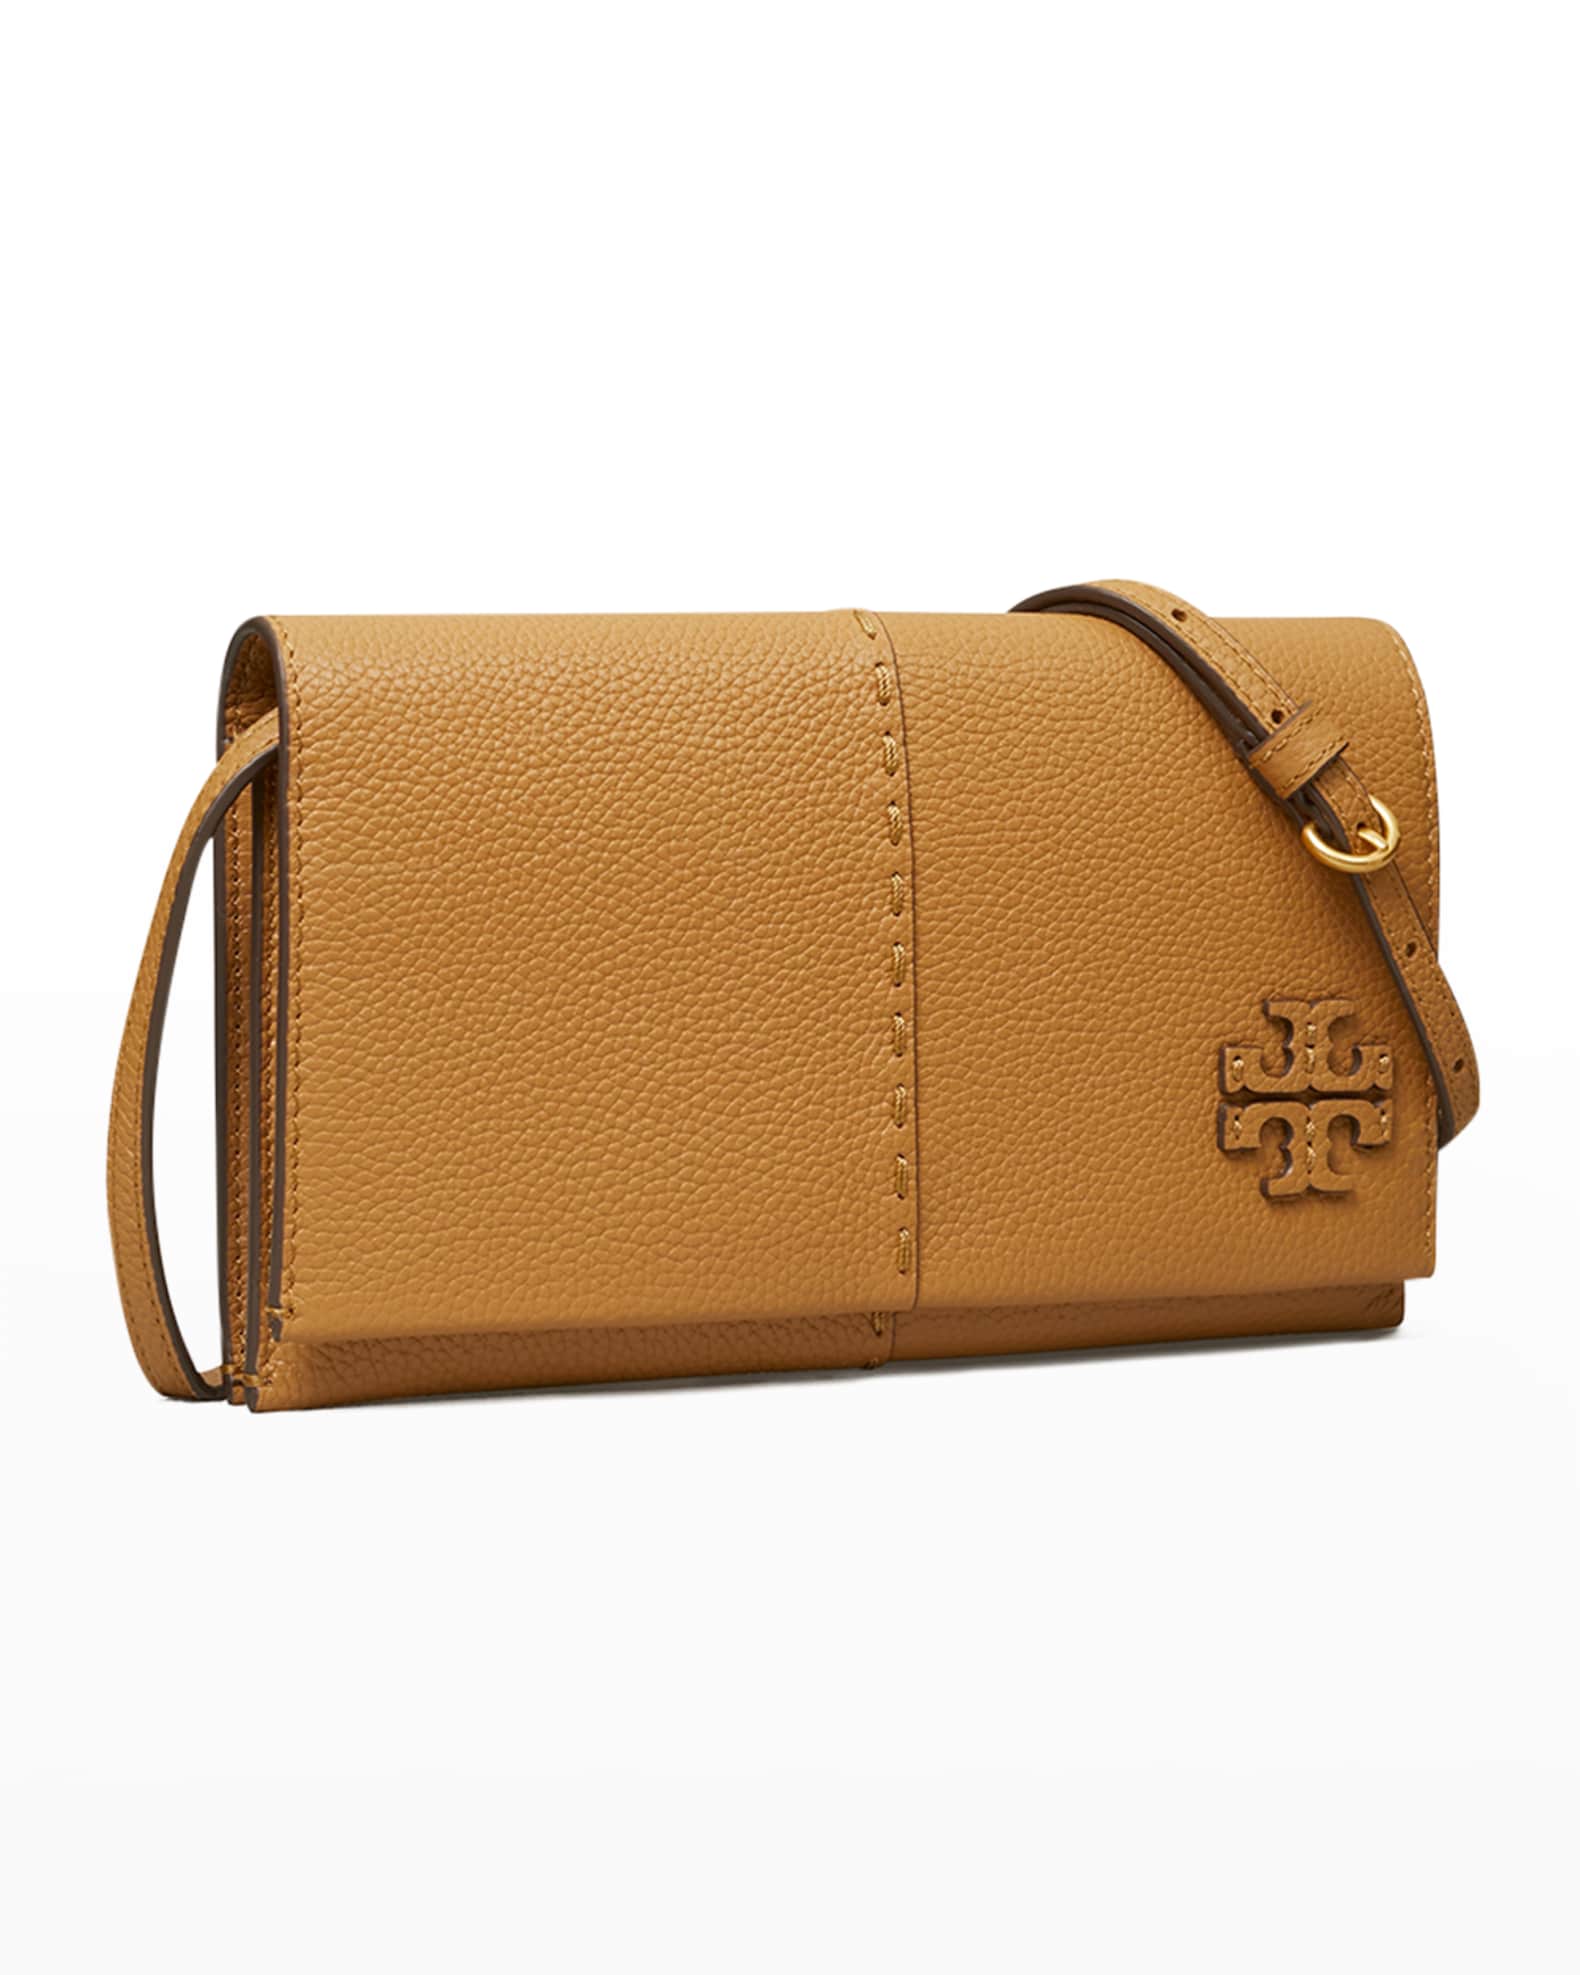 Tory Burch McGraw Patchwork Multicolor Leather Wallet Crossbody Bag - NWT  $498